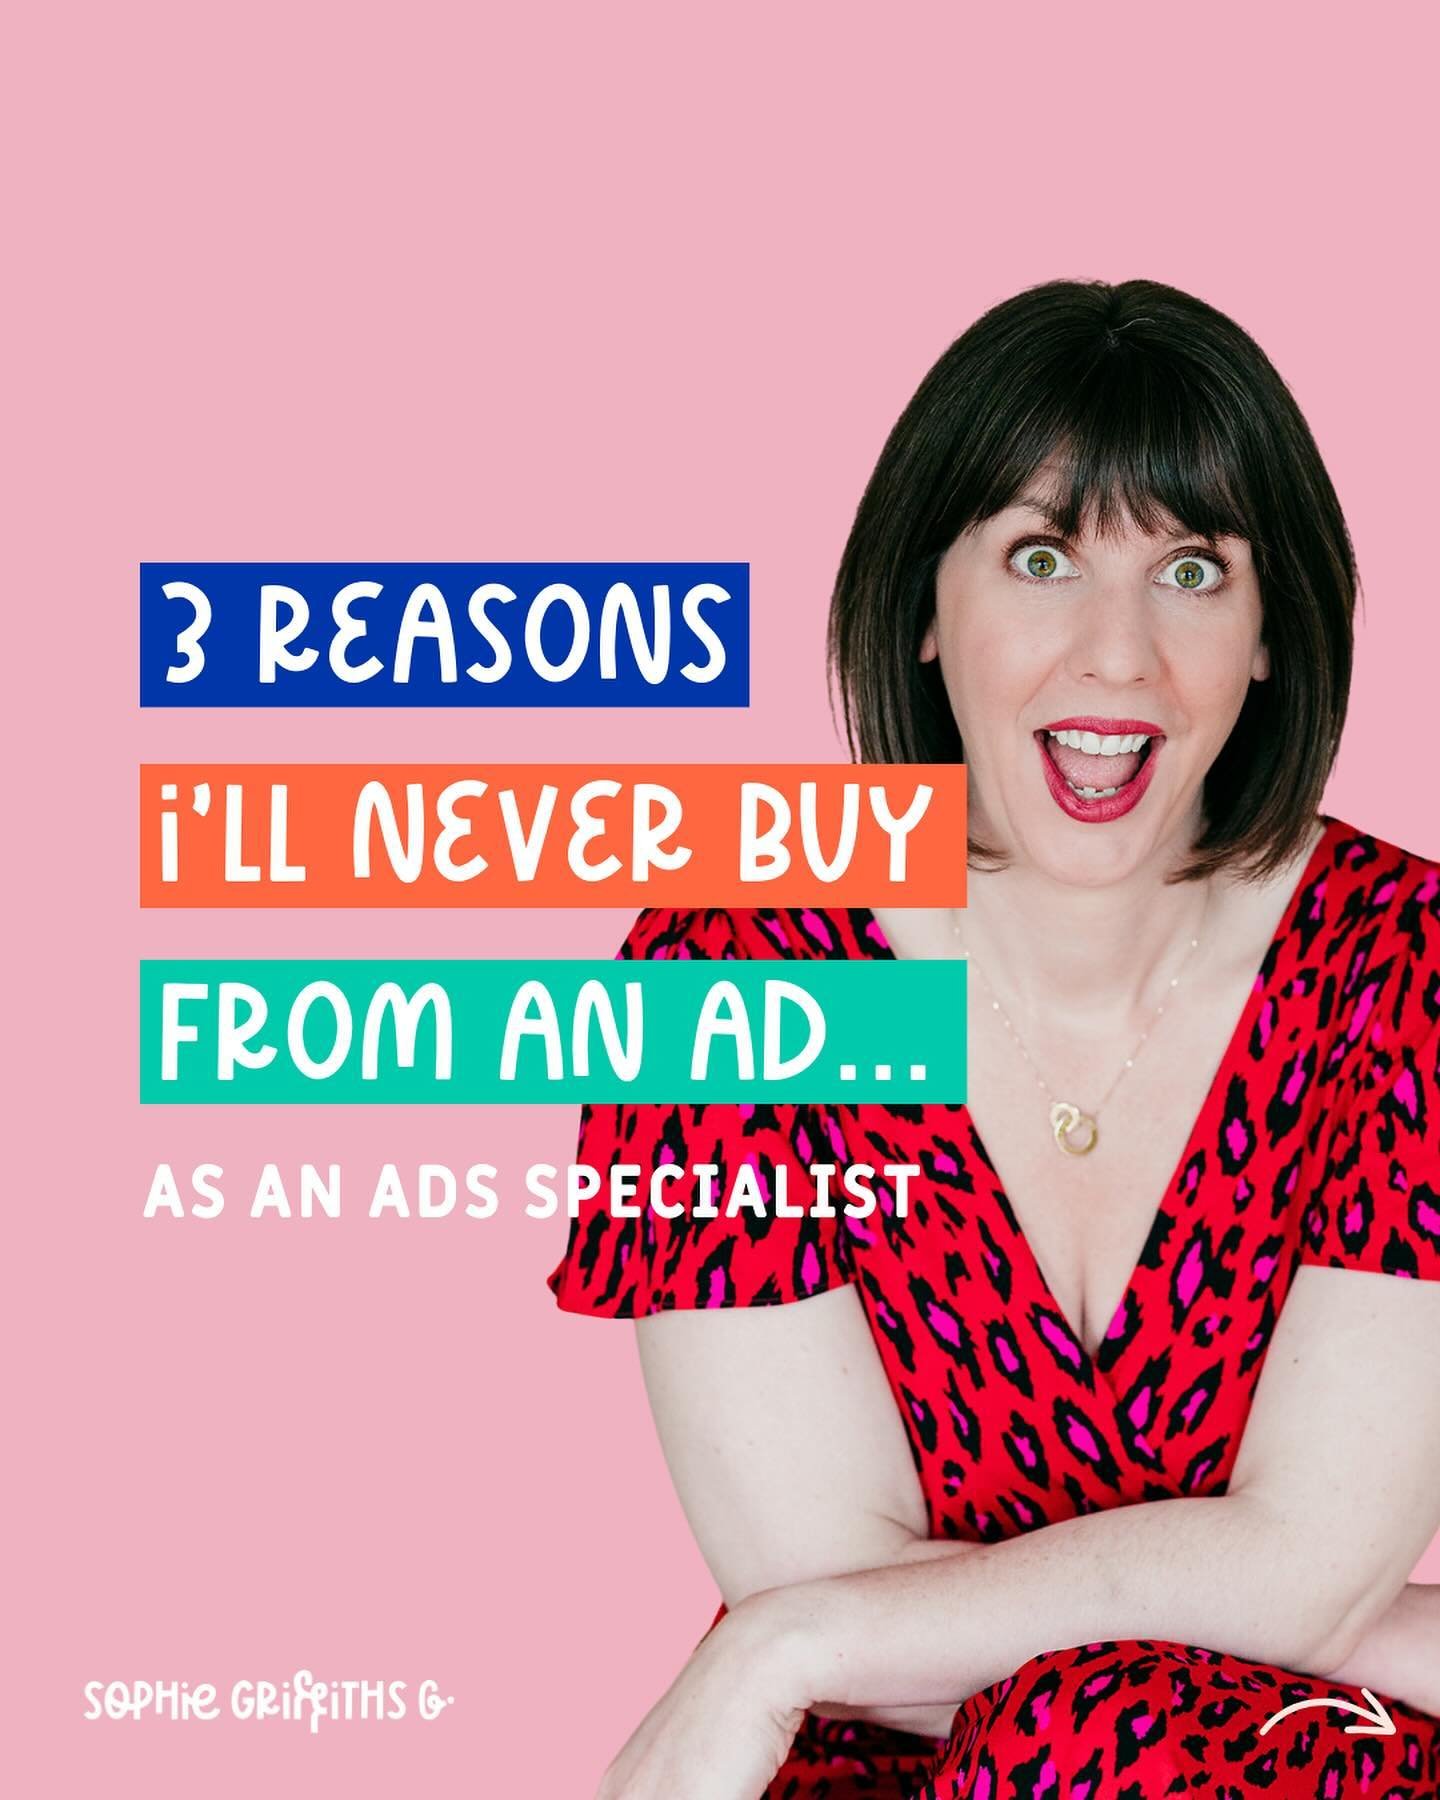 You won&rsquo;t catch me buying from a Facebook ad 🫣

... if it doesn&rsquo;t meet certain standards!

It wouldn&rsquo;t be right if I didn&rsquo;t have strict criteria for the ads I buy from, would it?

Swipe for my red flags 🚩 and hit save to avo